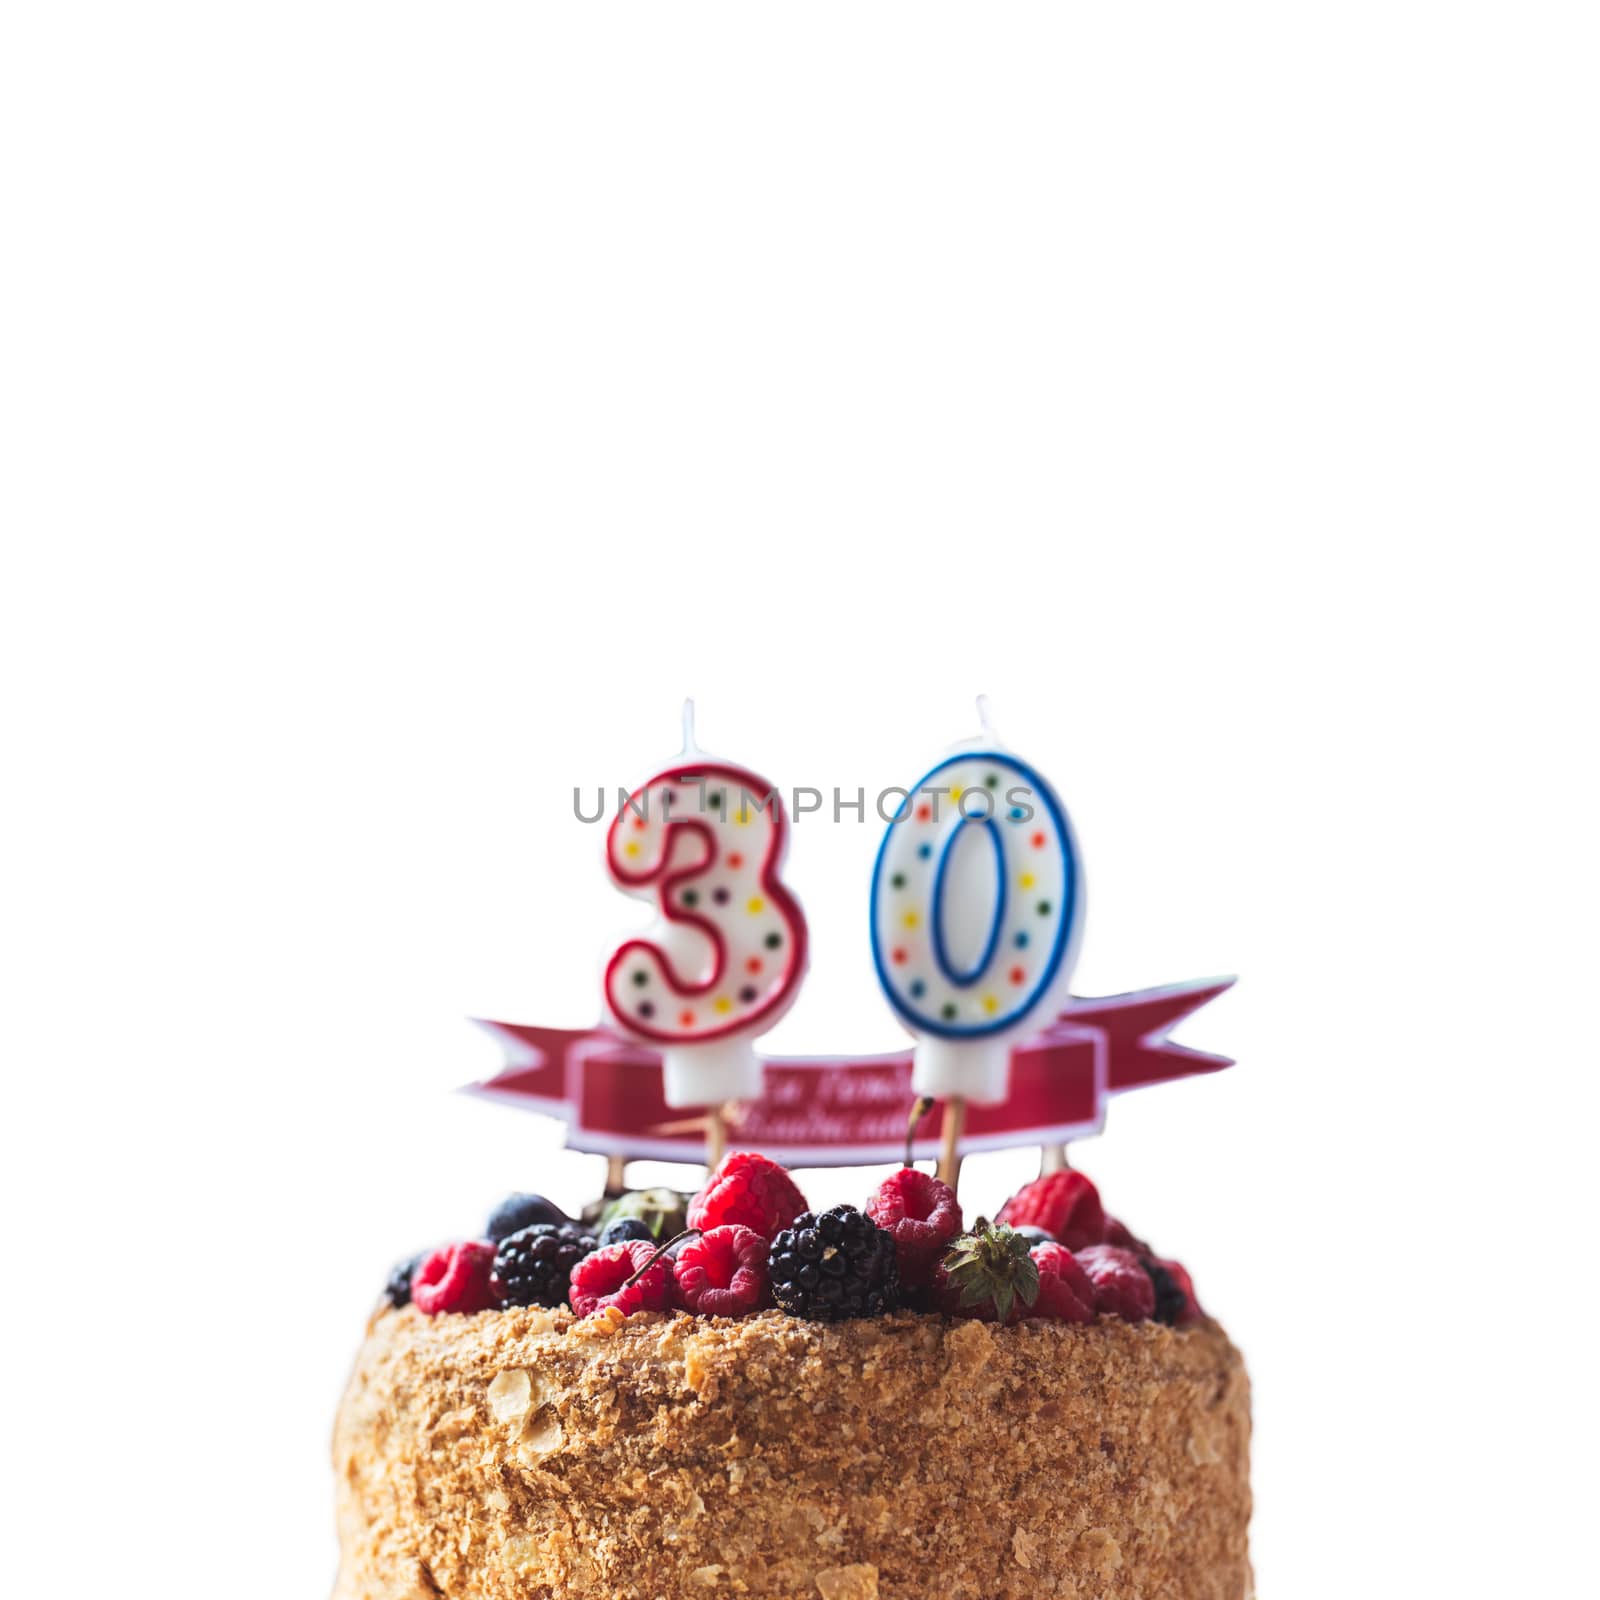 raspberries blackberry birthday cake with candles number 30 on white background and copyspace for your text.